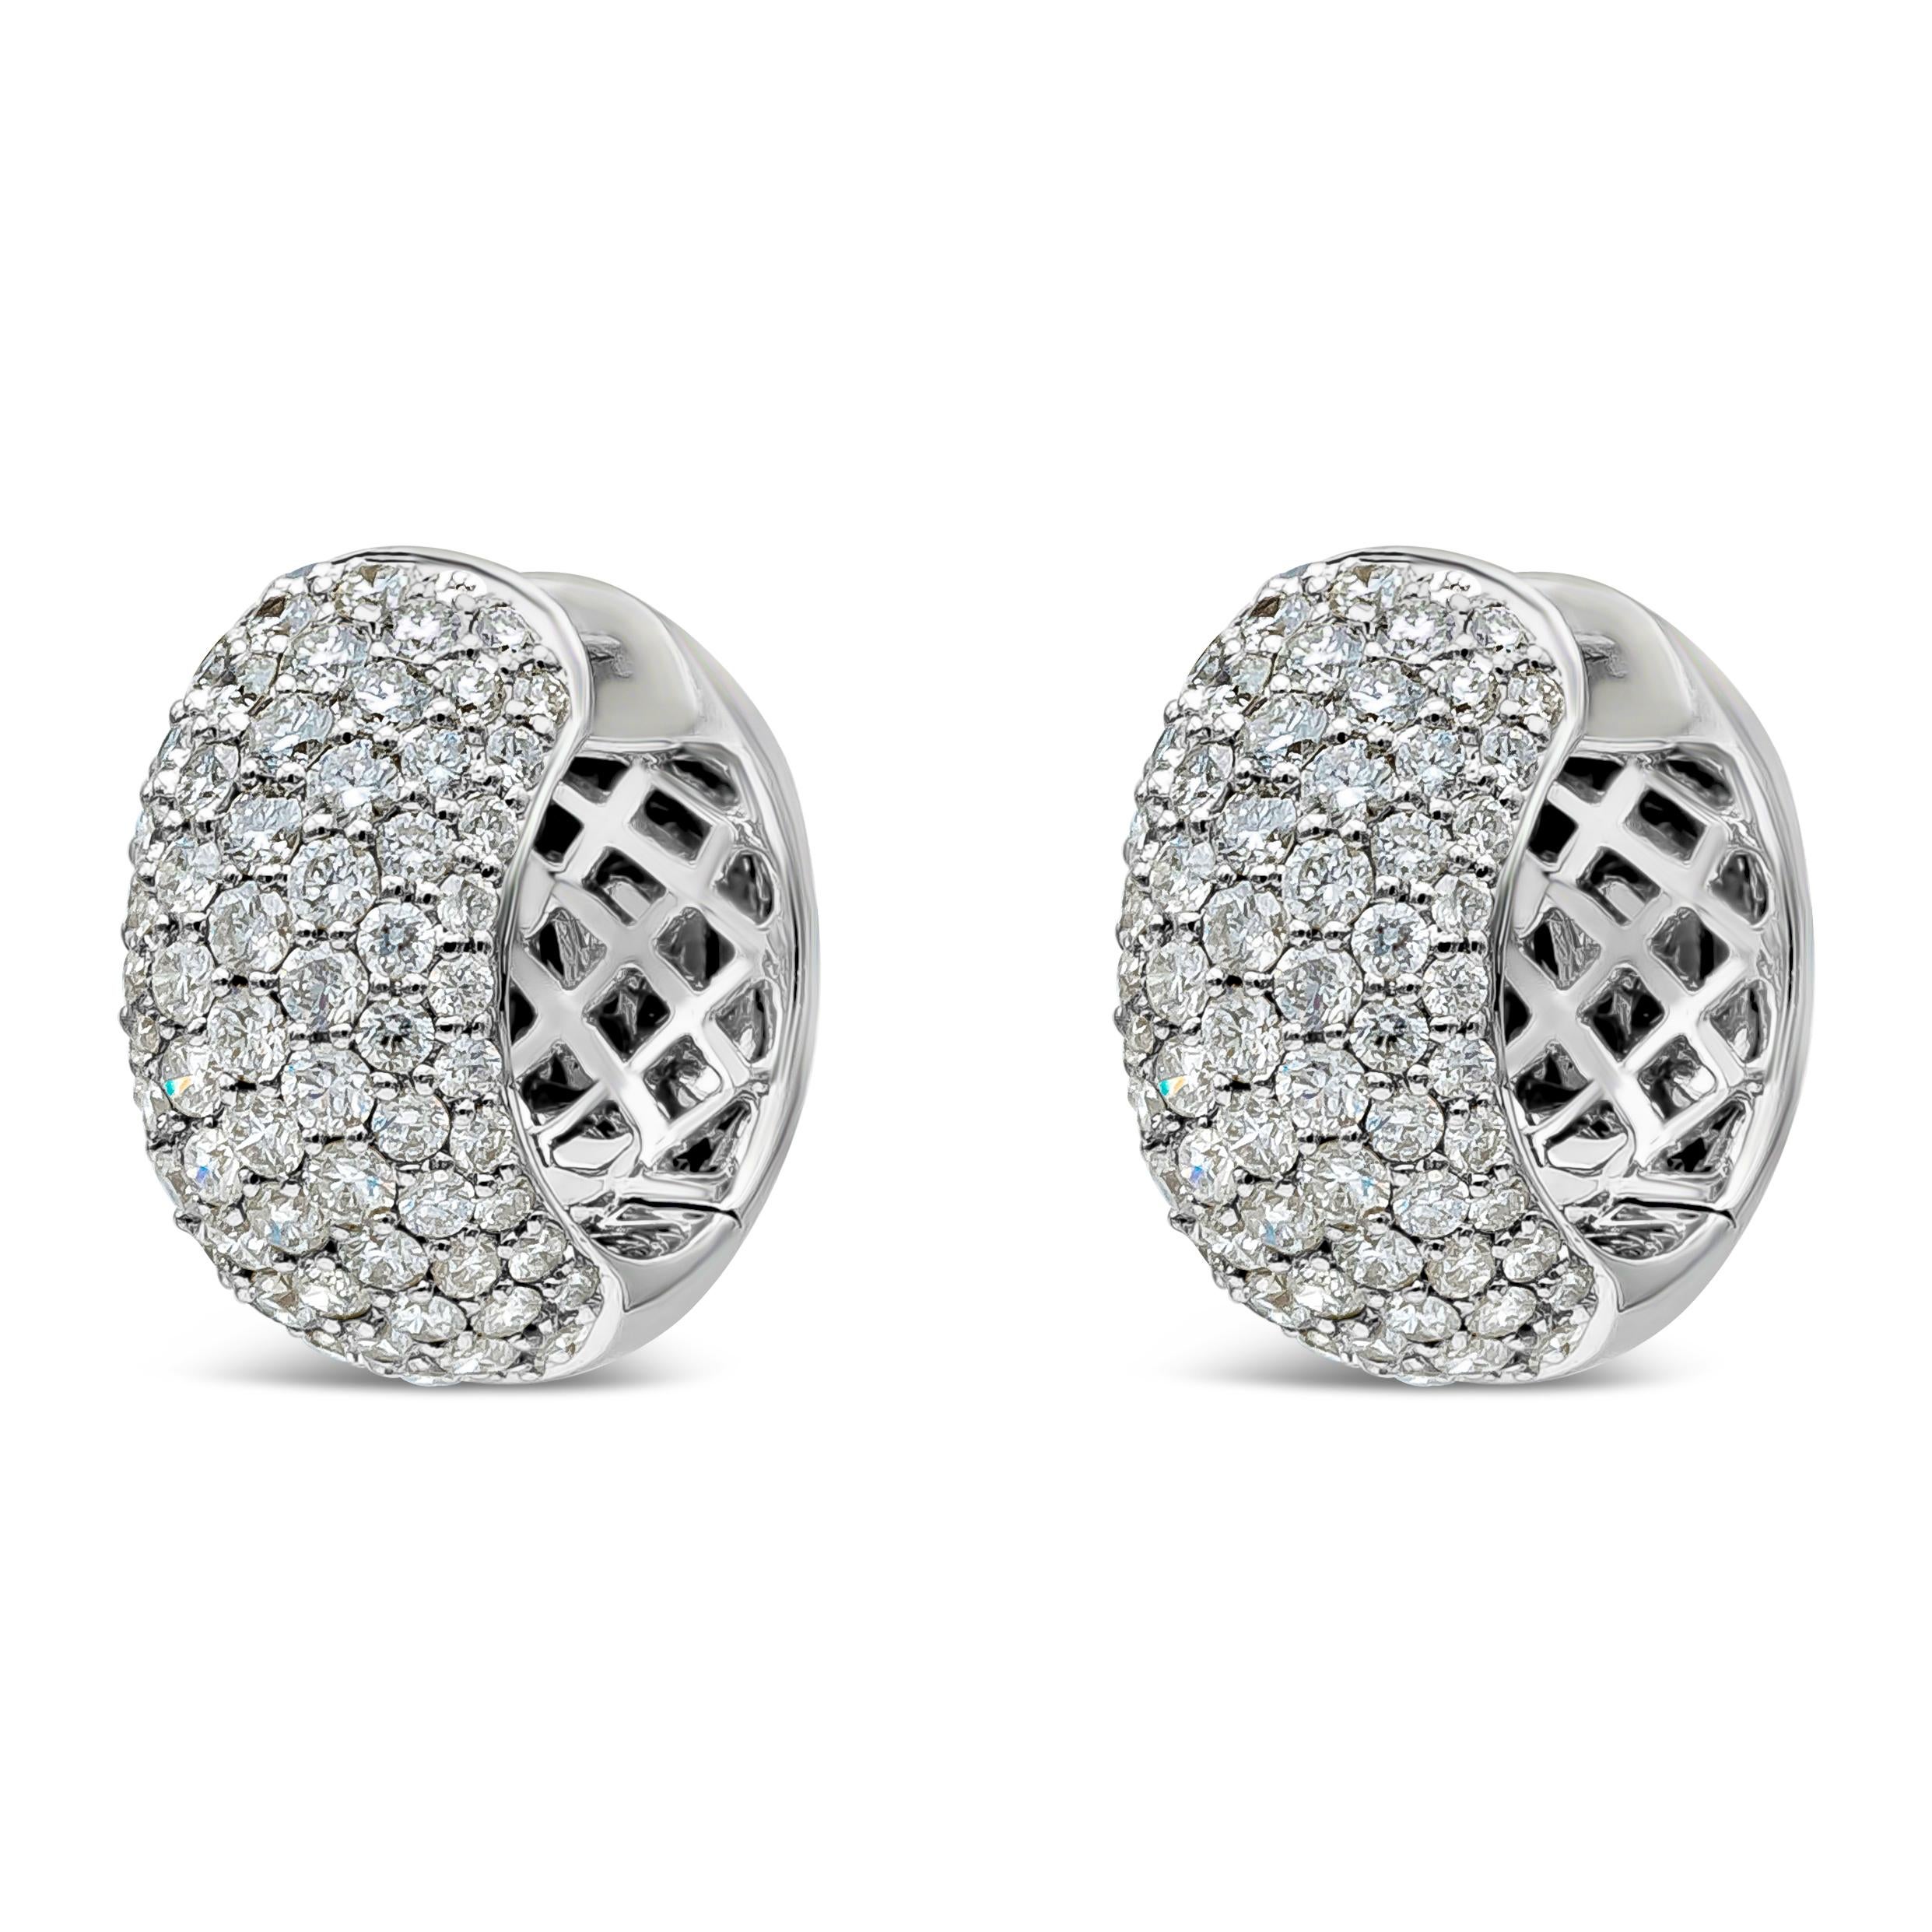 A simple chic rounded huggie hoop earrings showcasing 146 pieces round diamond weighing 2.72 carat total, F Color and VS in Clarity. Pave style setting. Made with 18K White Gold. 

Style available in different price ranges. Prices are based on your